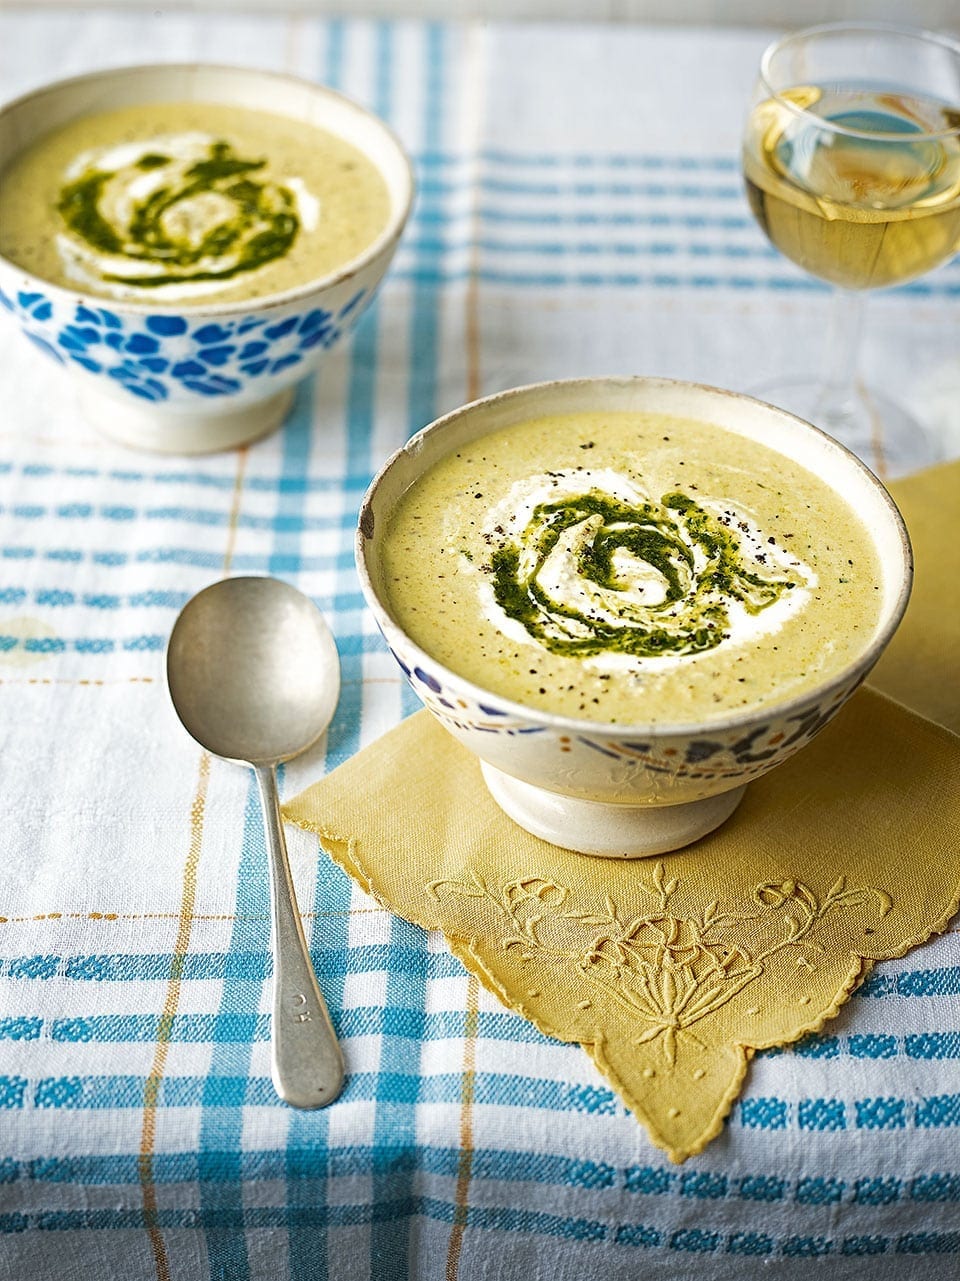 Chilled cucumber and almond soup recipe | delicious. magazine